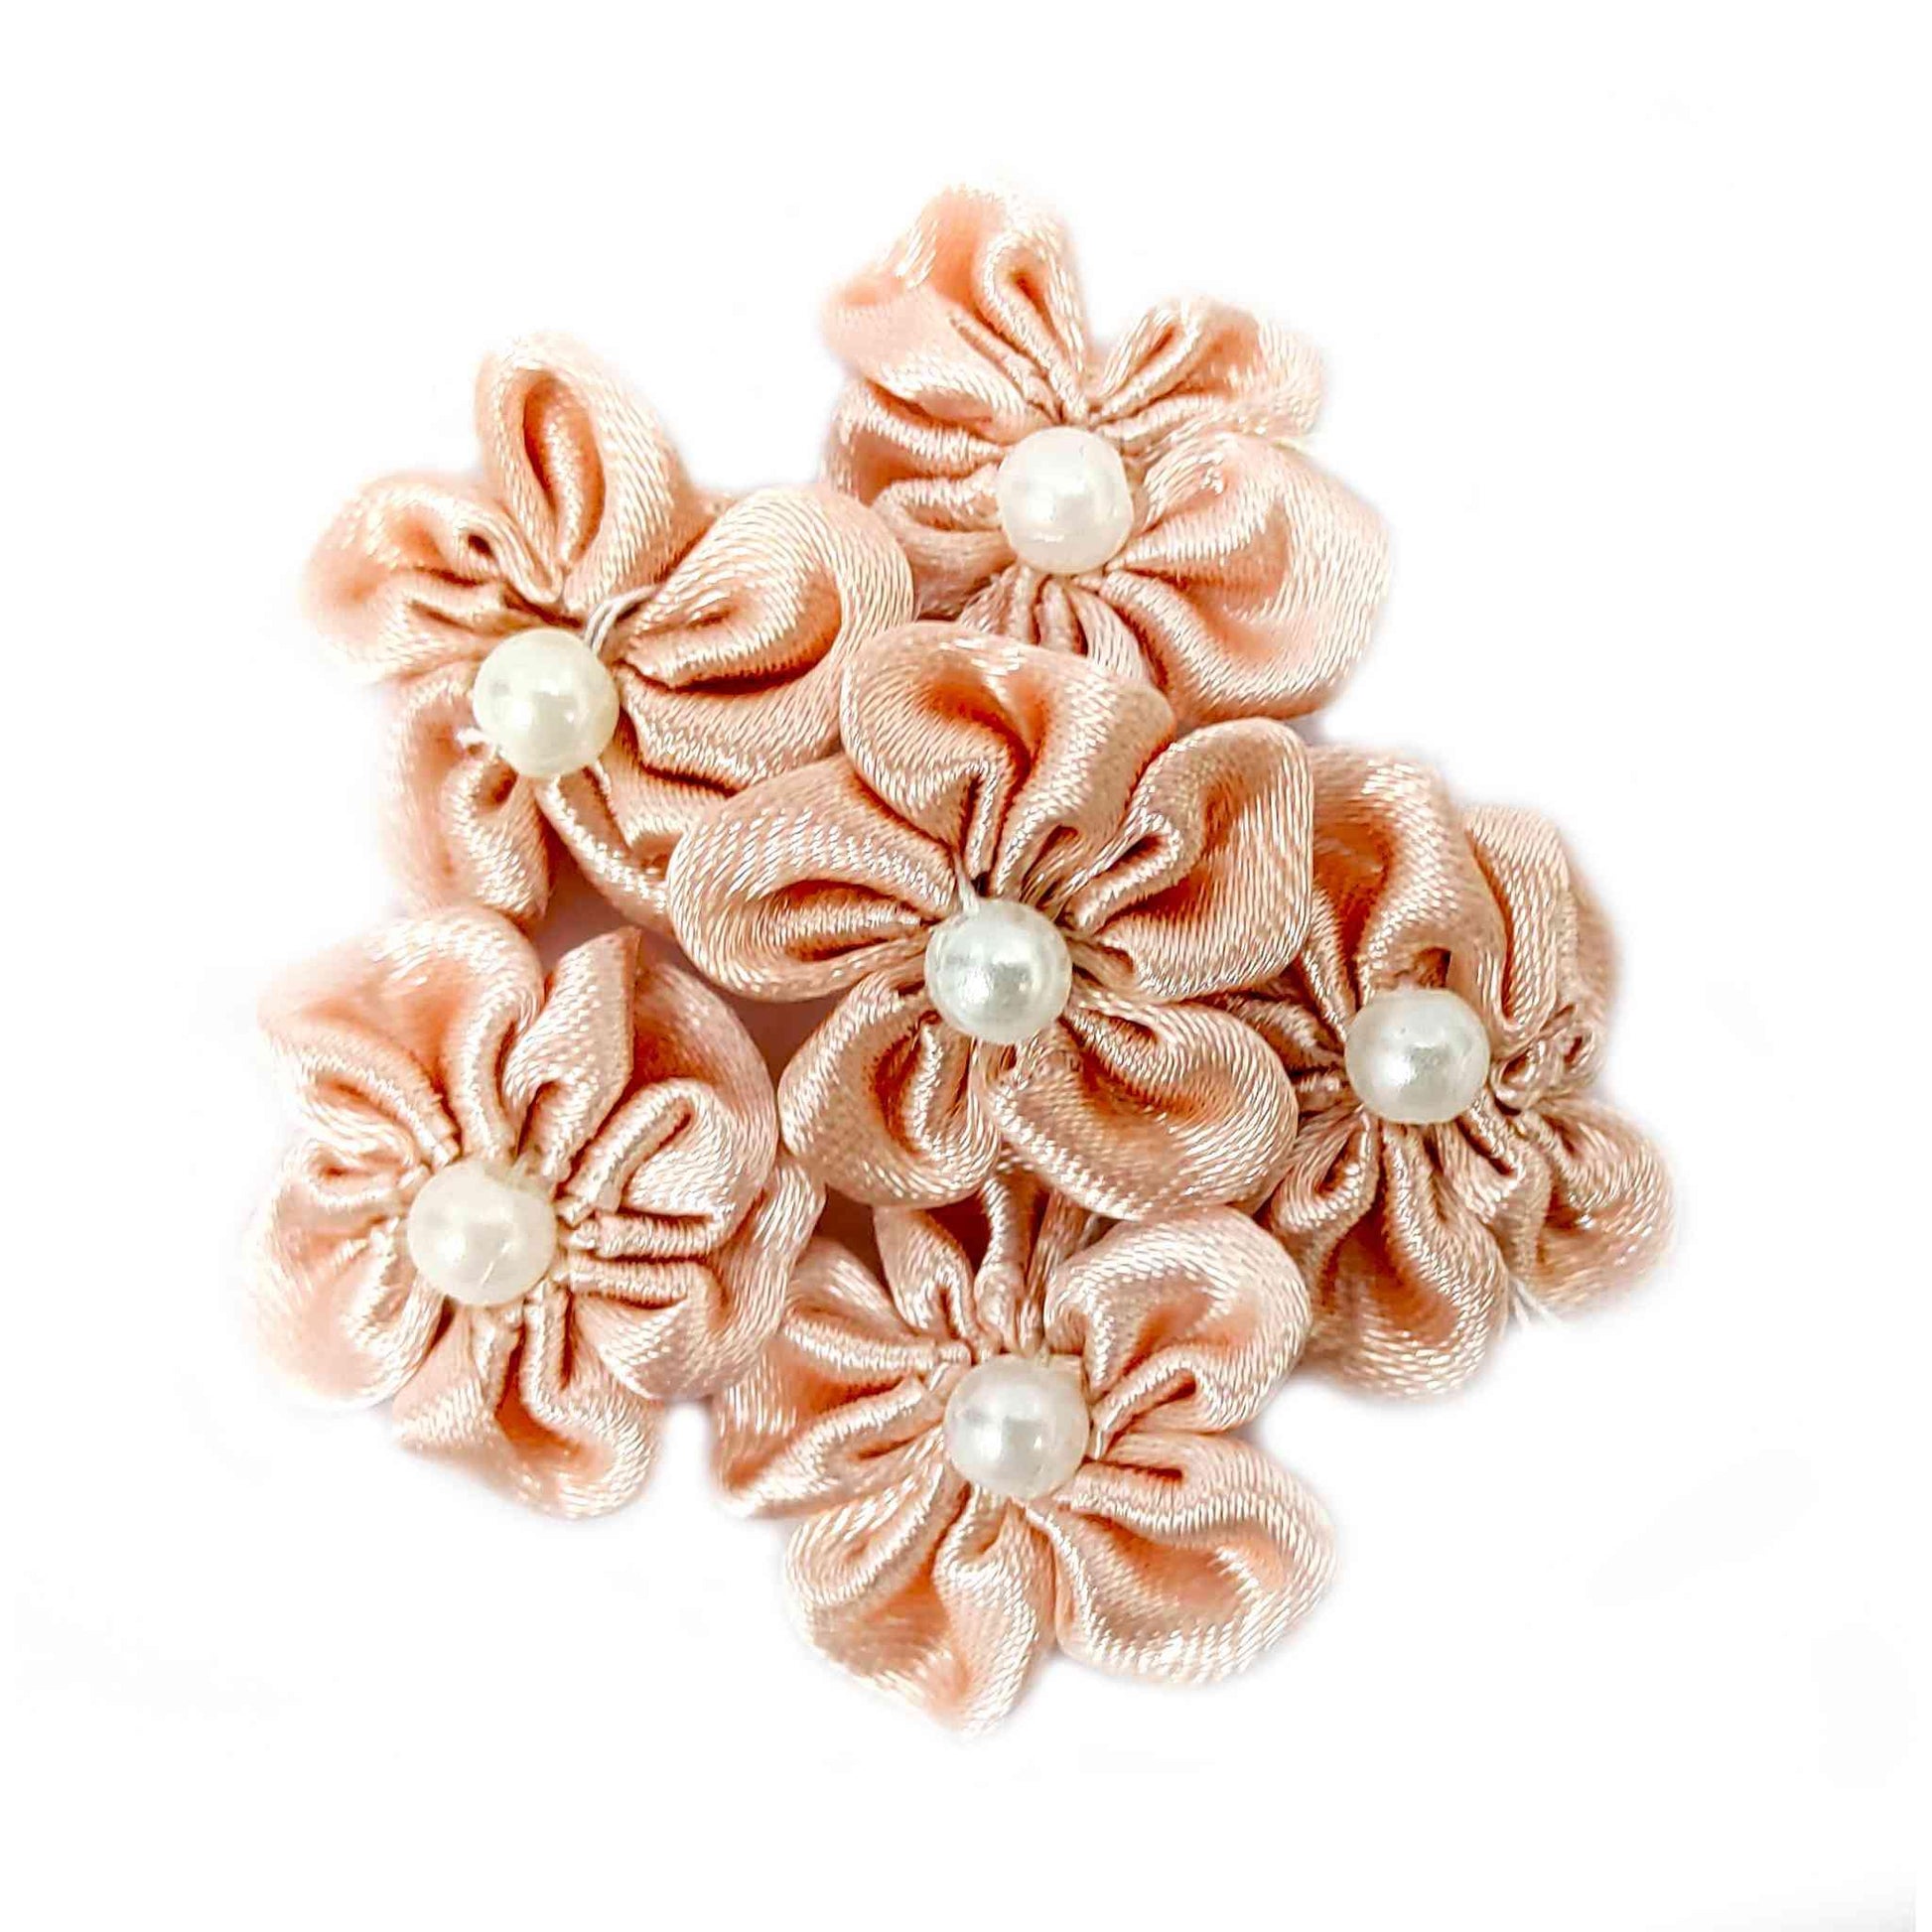 Indian Petals Beautiful Fabric Small Flowers with Pearl for DIY Craft, Trouseau Packing or Decoration (Bunch of 12) - Design 42, Blanched Almond - Indian Petals